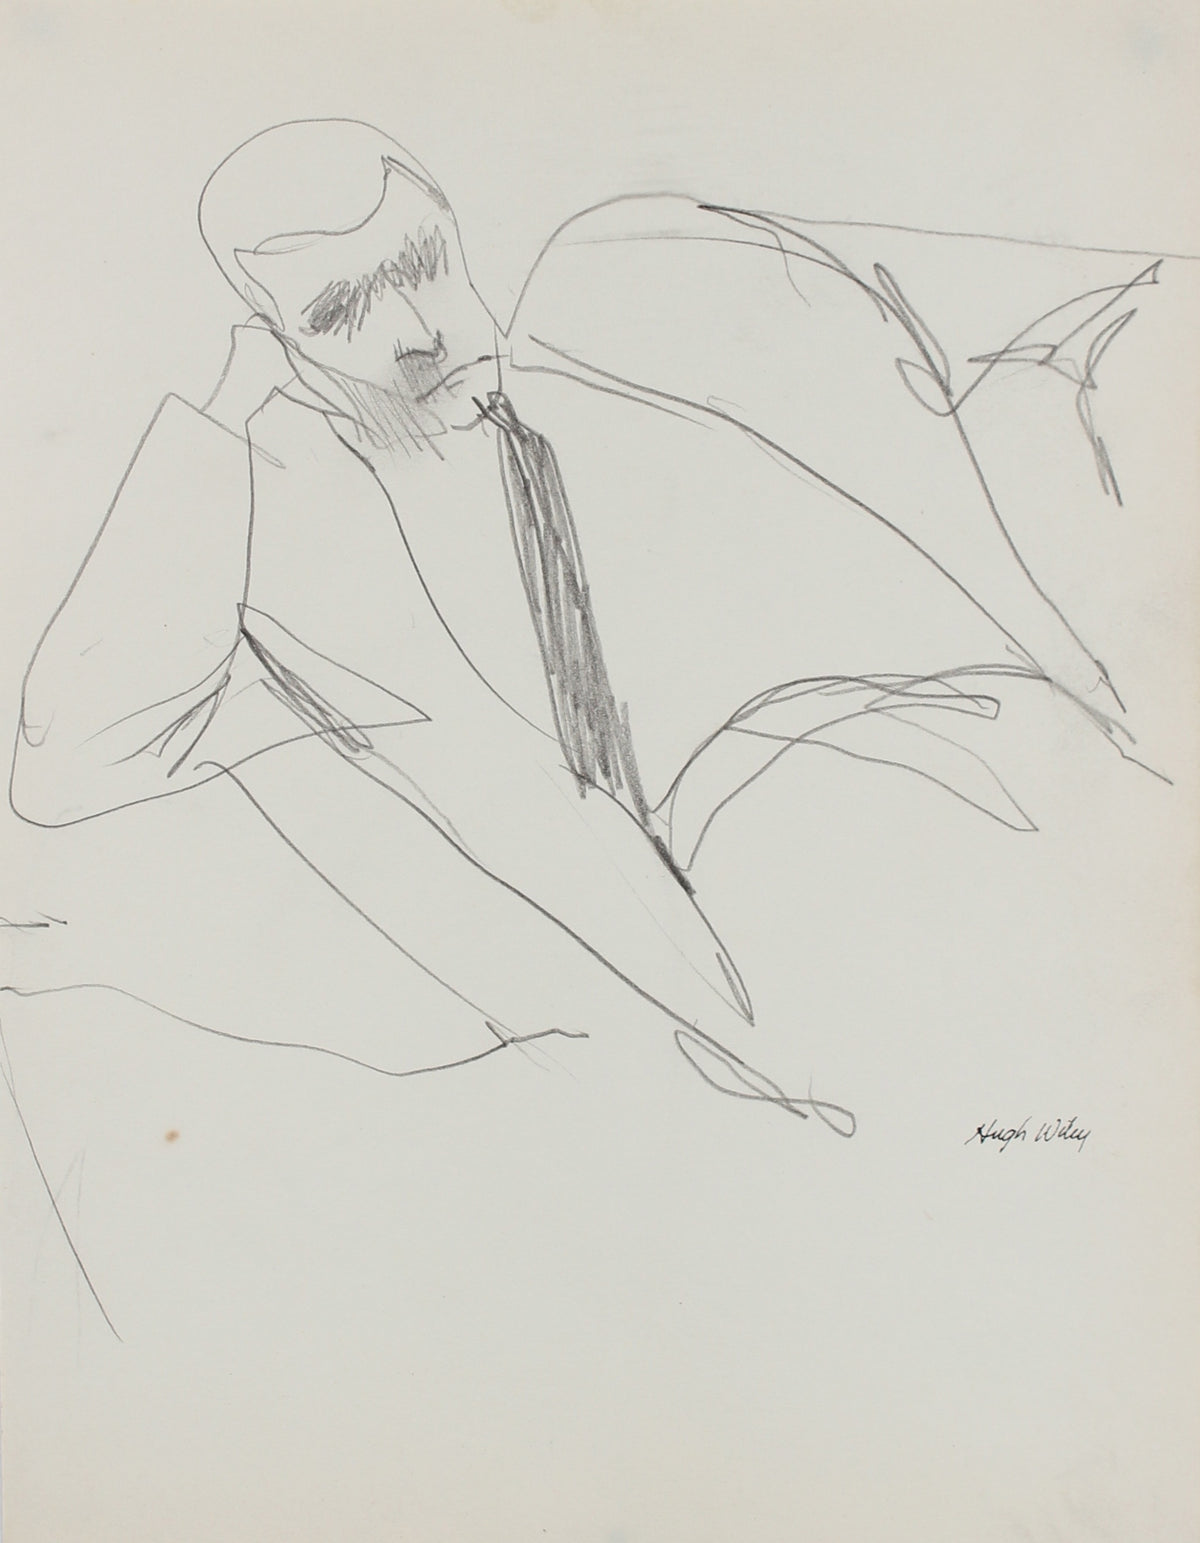 Reclined Figure in a Suit &lt;br&gt;1958 Graphite &lt;br&gt;&lt;br&gt;#A1853